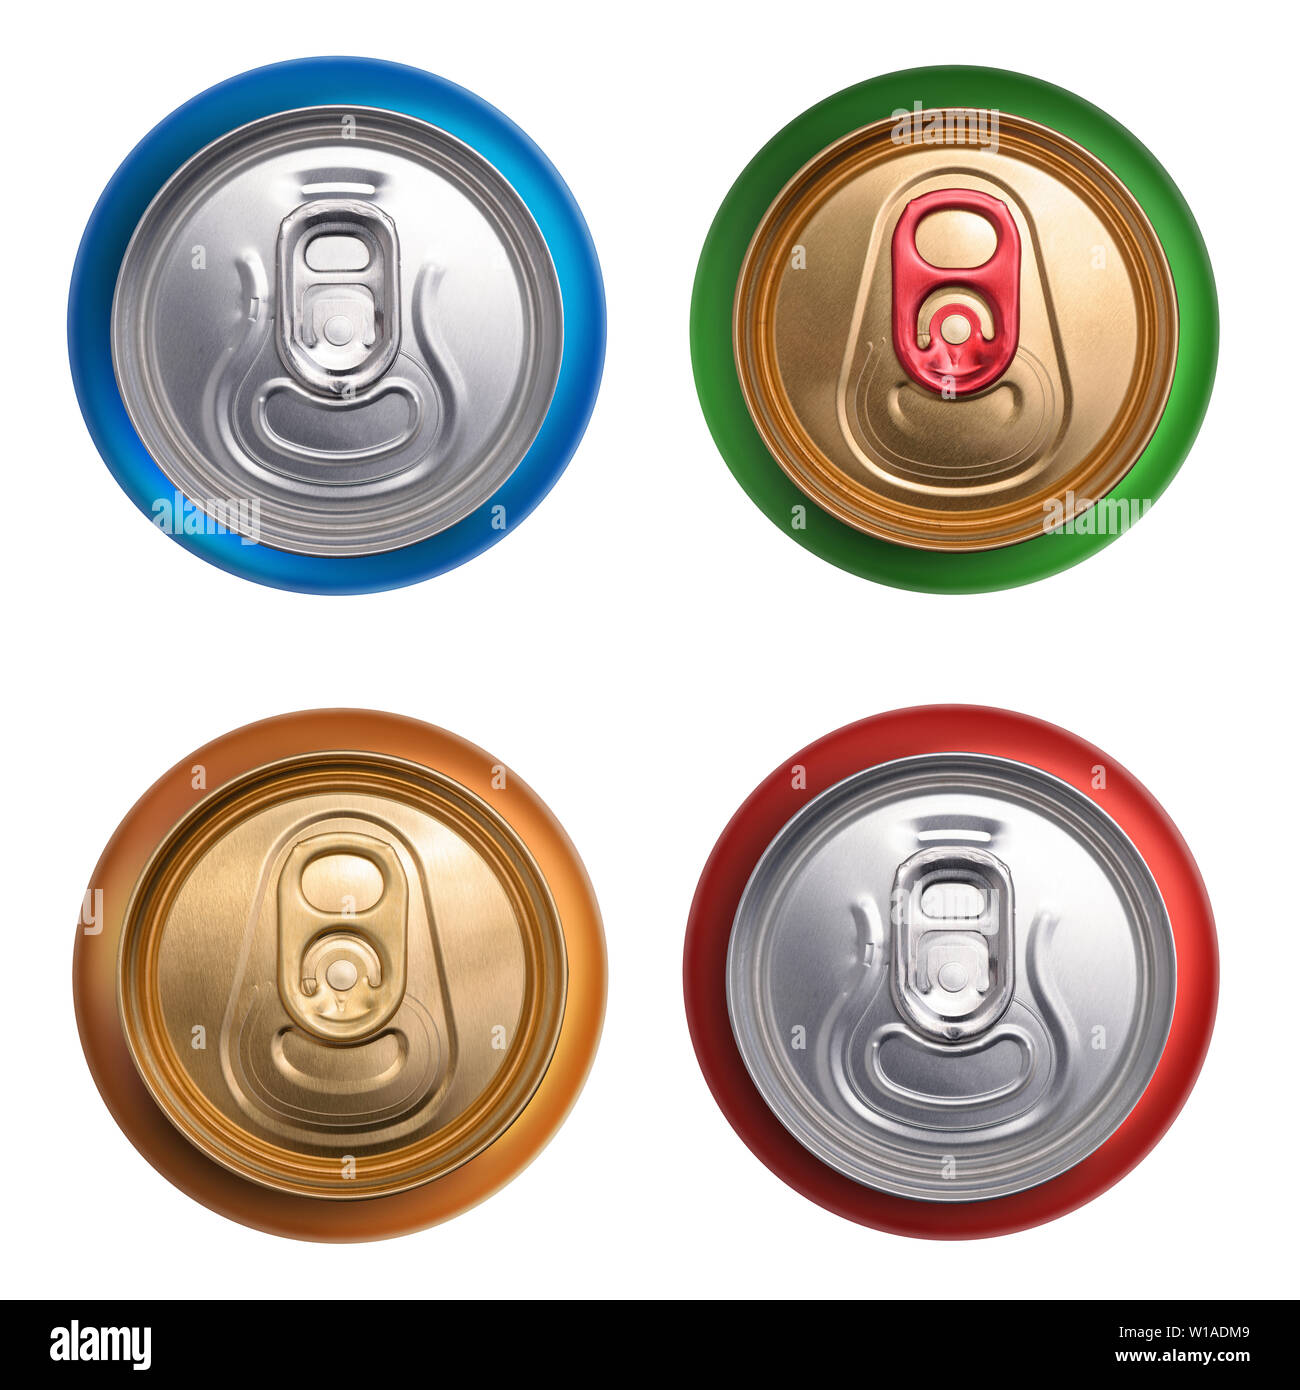 Set of drink cans. Top view isolated on white background Stock Photo